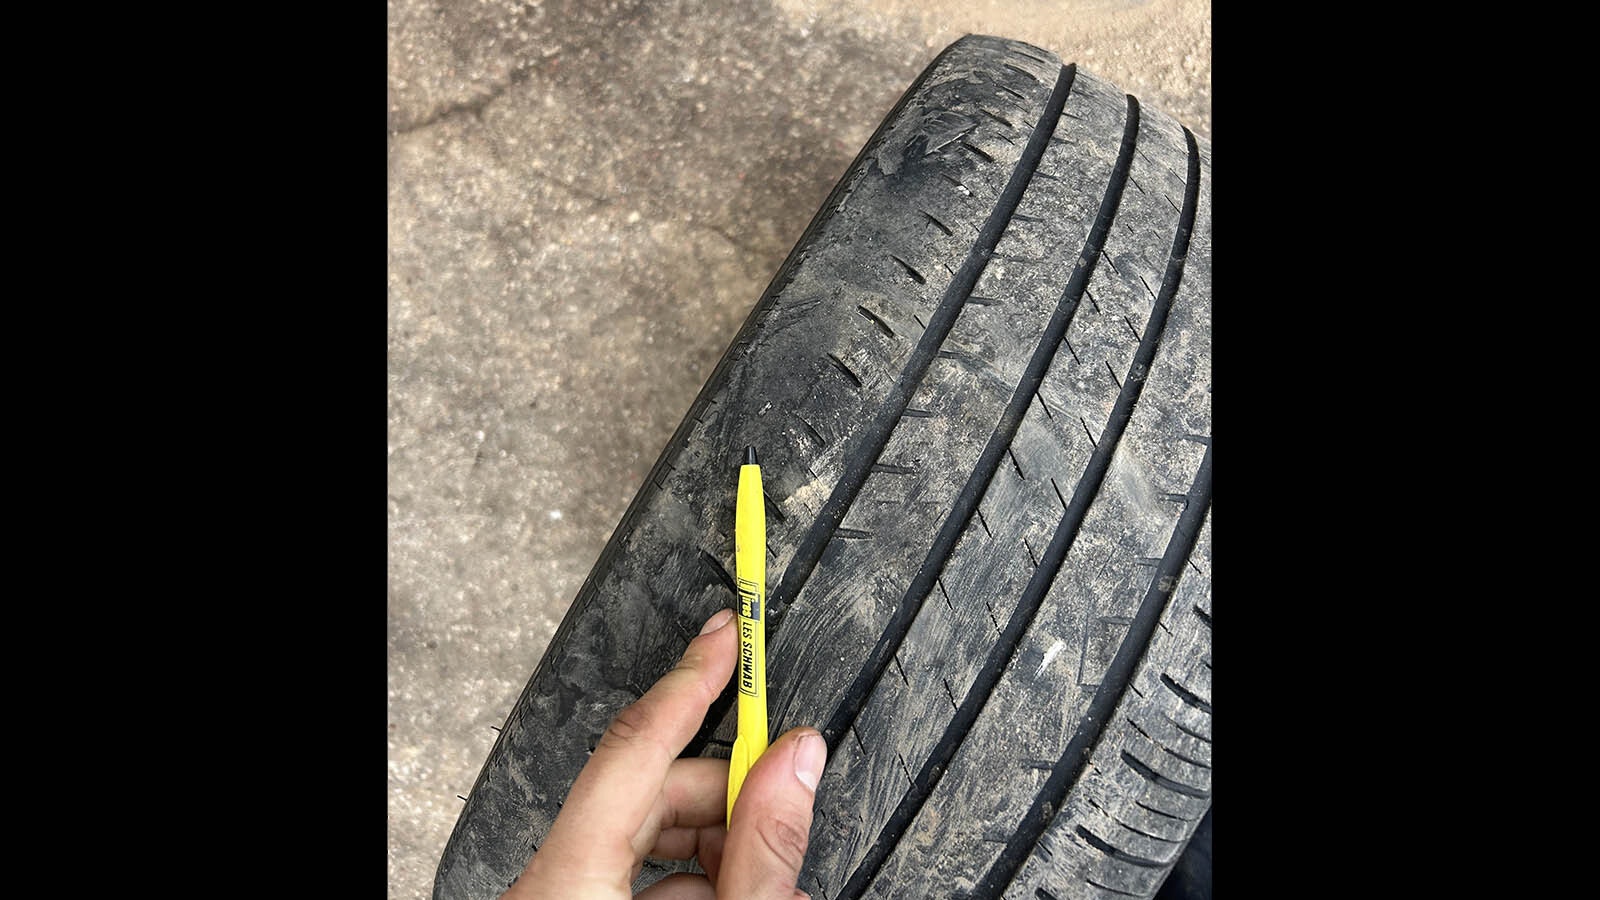 This Tesla tire is badly worn and was being changed out for the second time at Les Schwab Tire Center in Cheyenne.